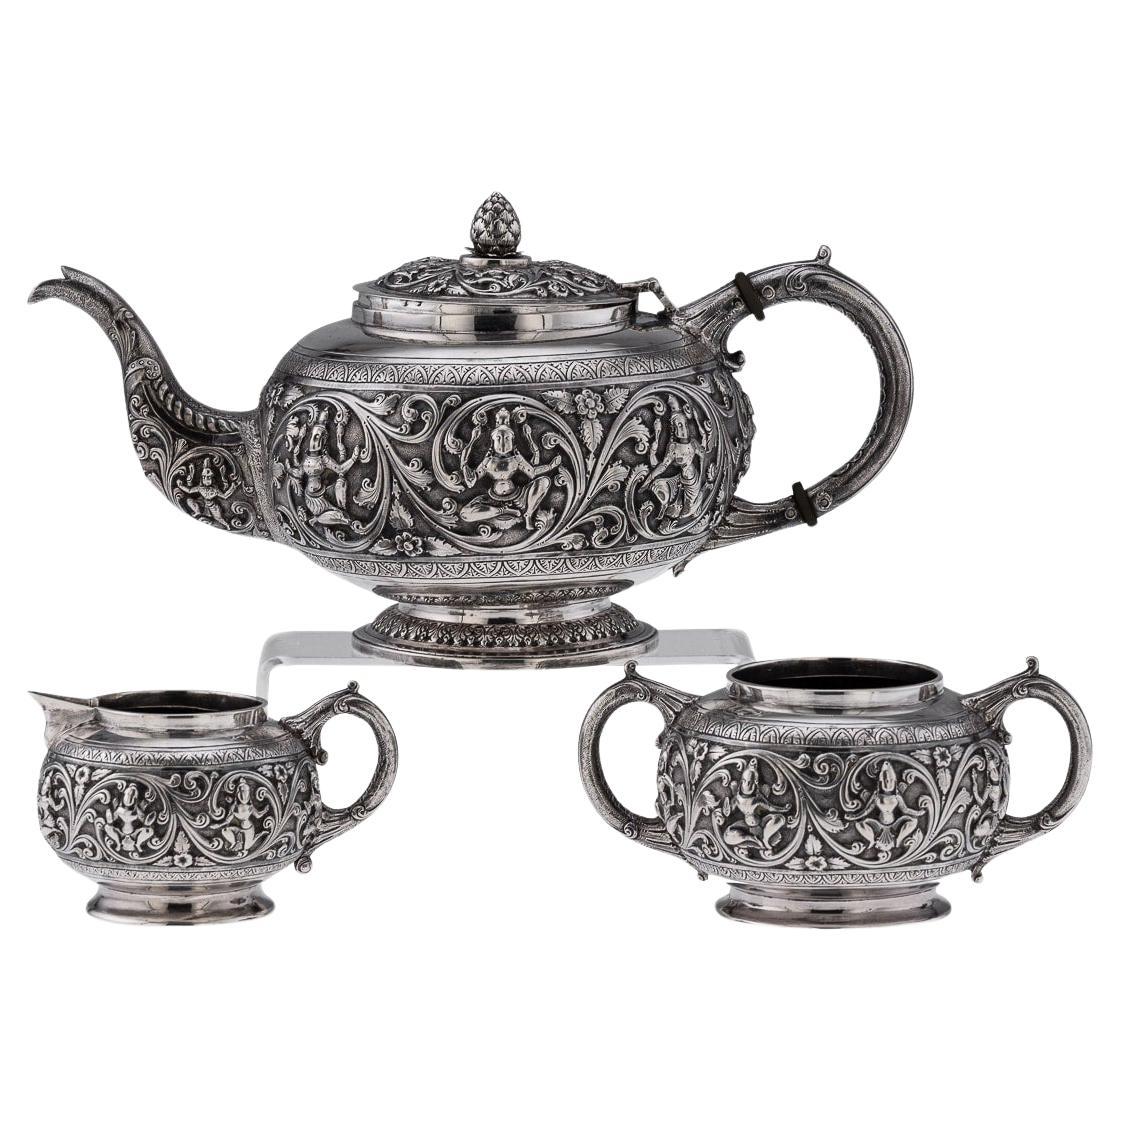 19th Century Indian Solid Silver Swami Tea Set, Daday Khan, Madras c.1880